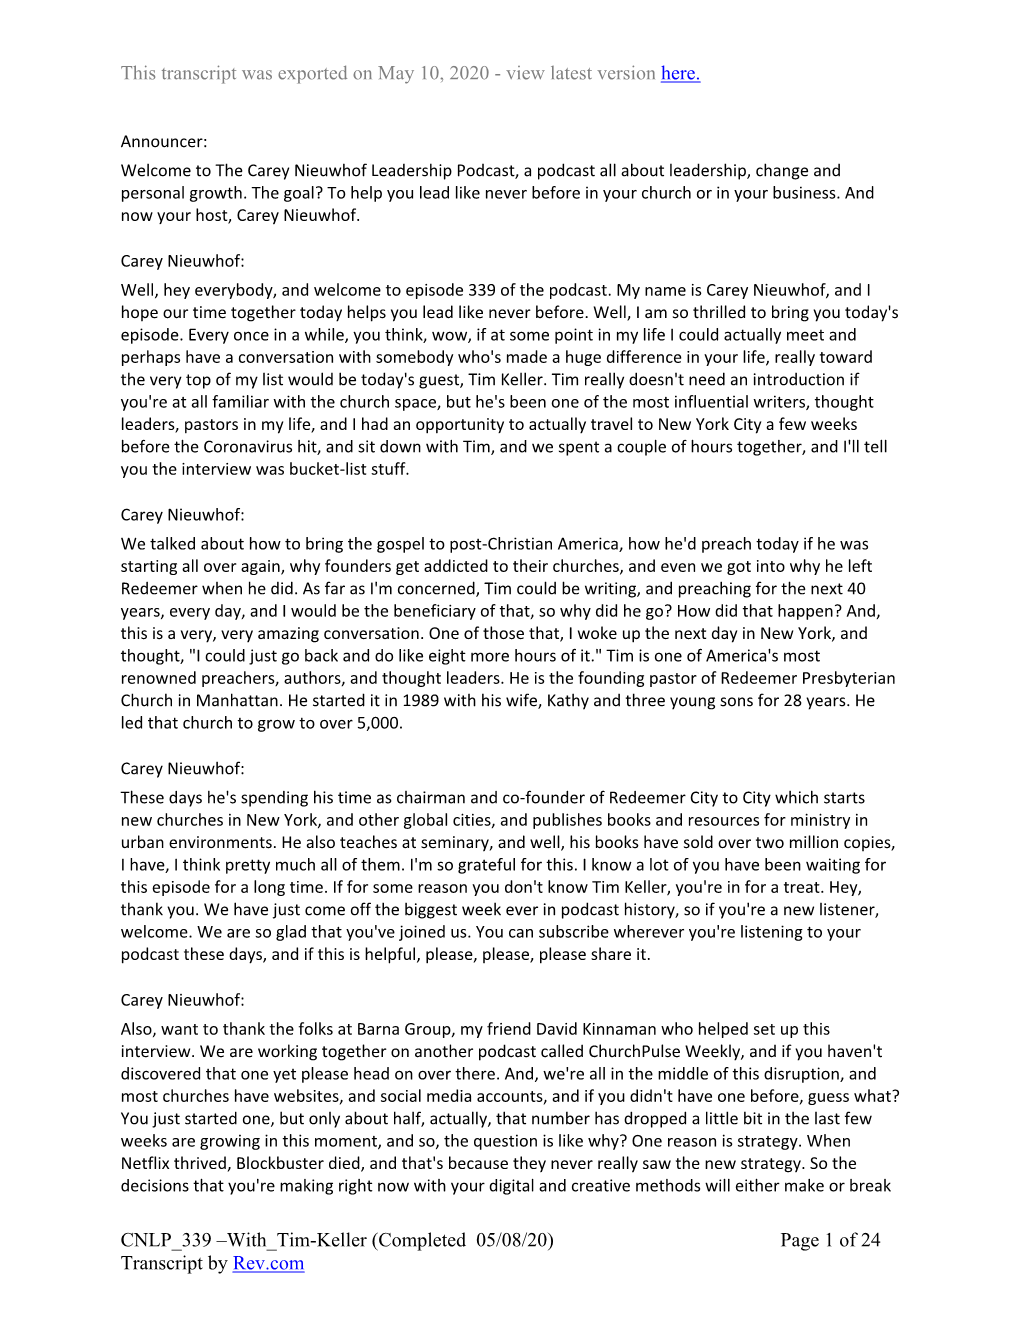 With Tim-Keller (Completed 05/08/20) Page 1 of 24 Transcript by Rev.Com This Transcript Was Exported on May 10, 2020 - View Latest Version Here